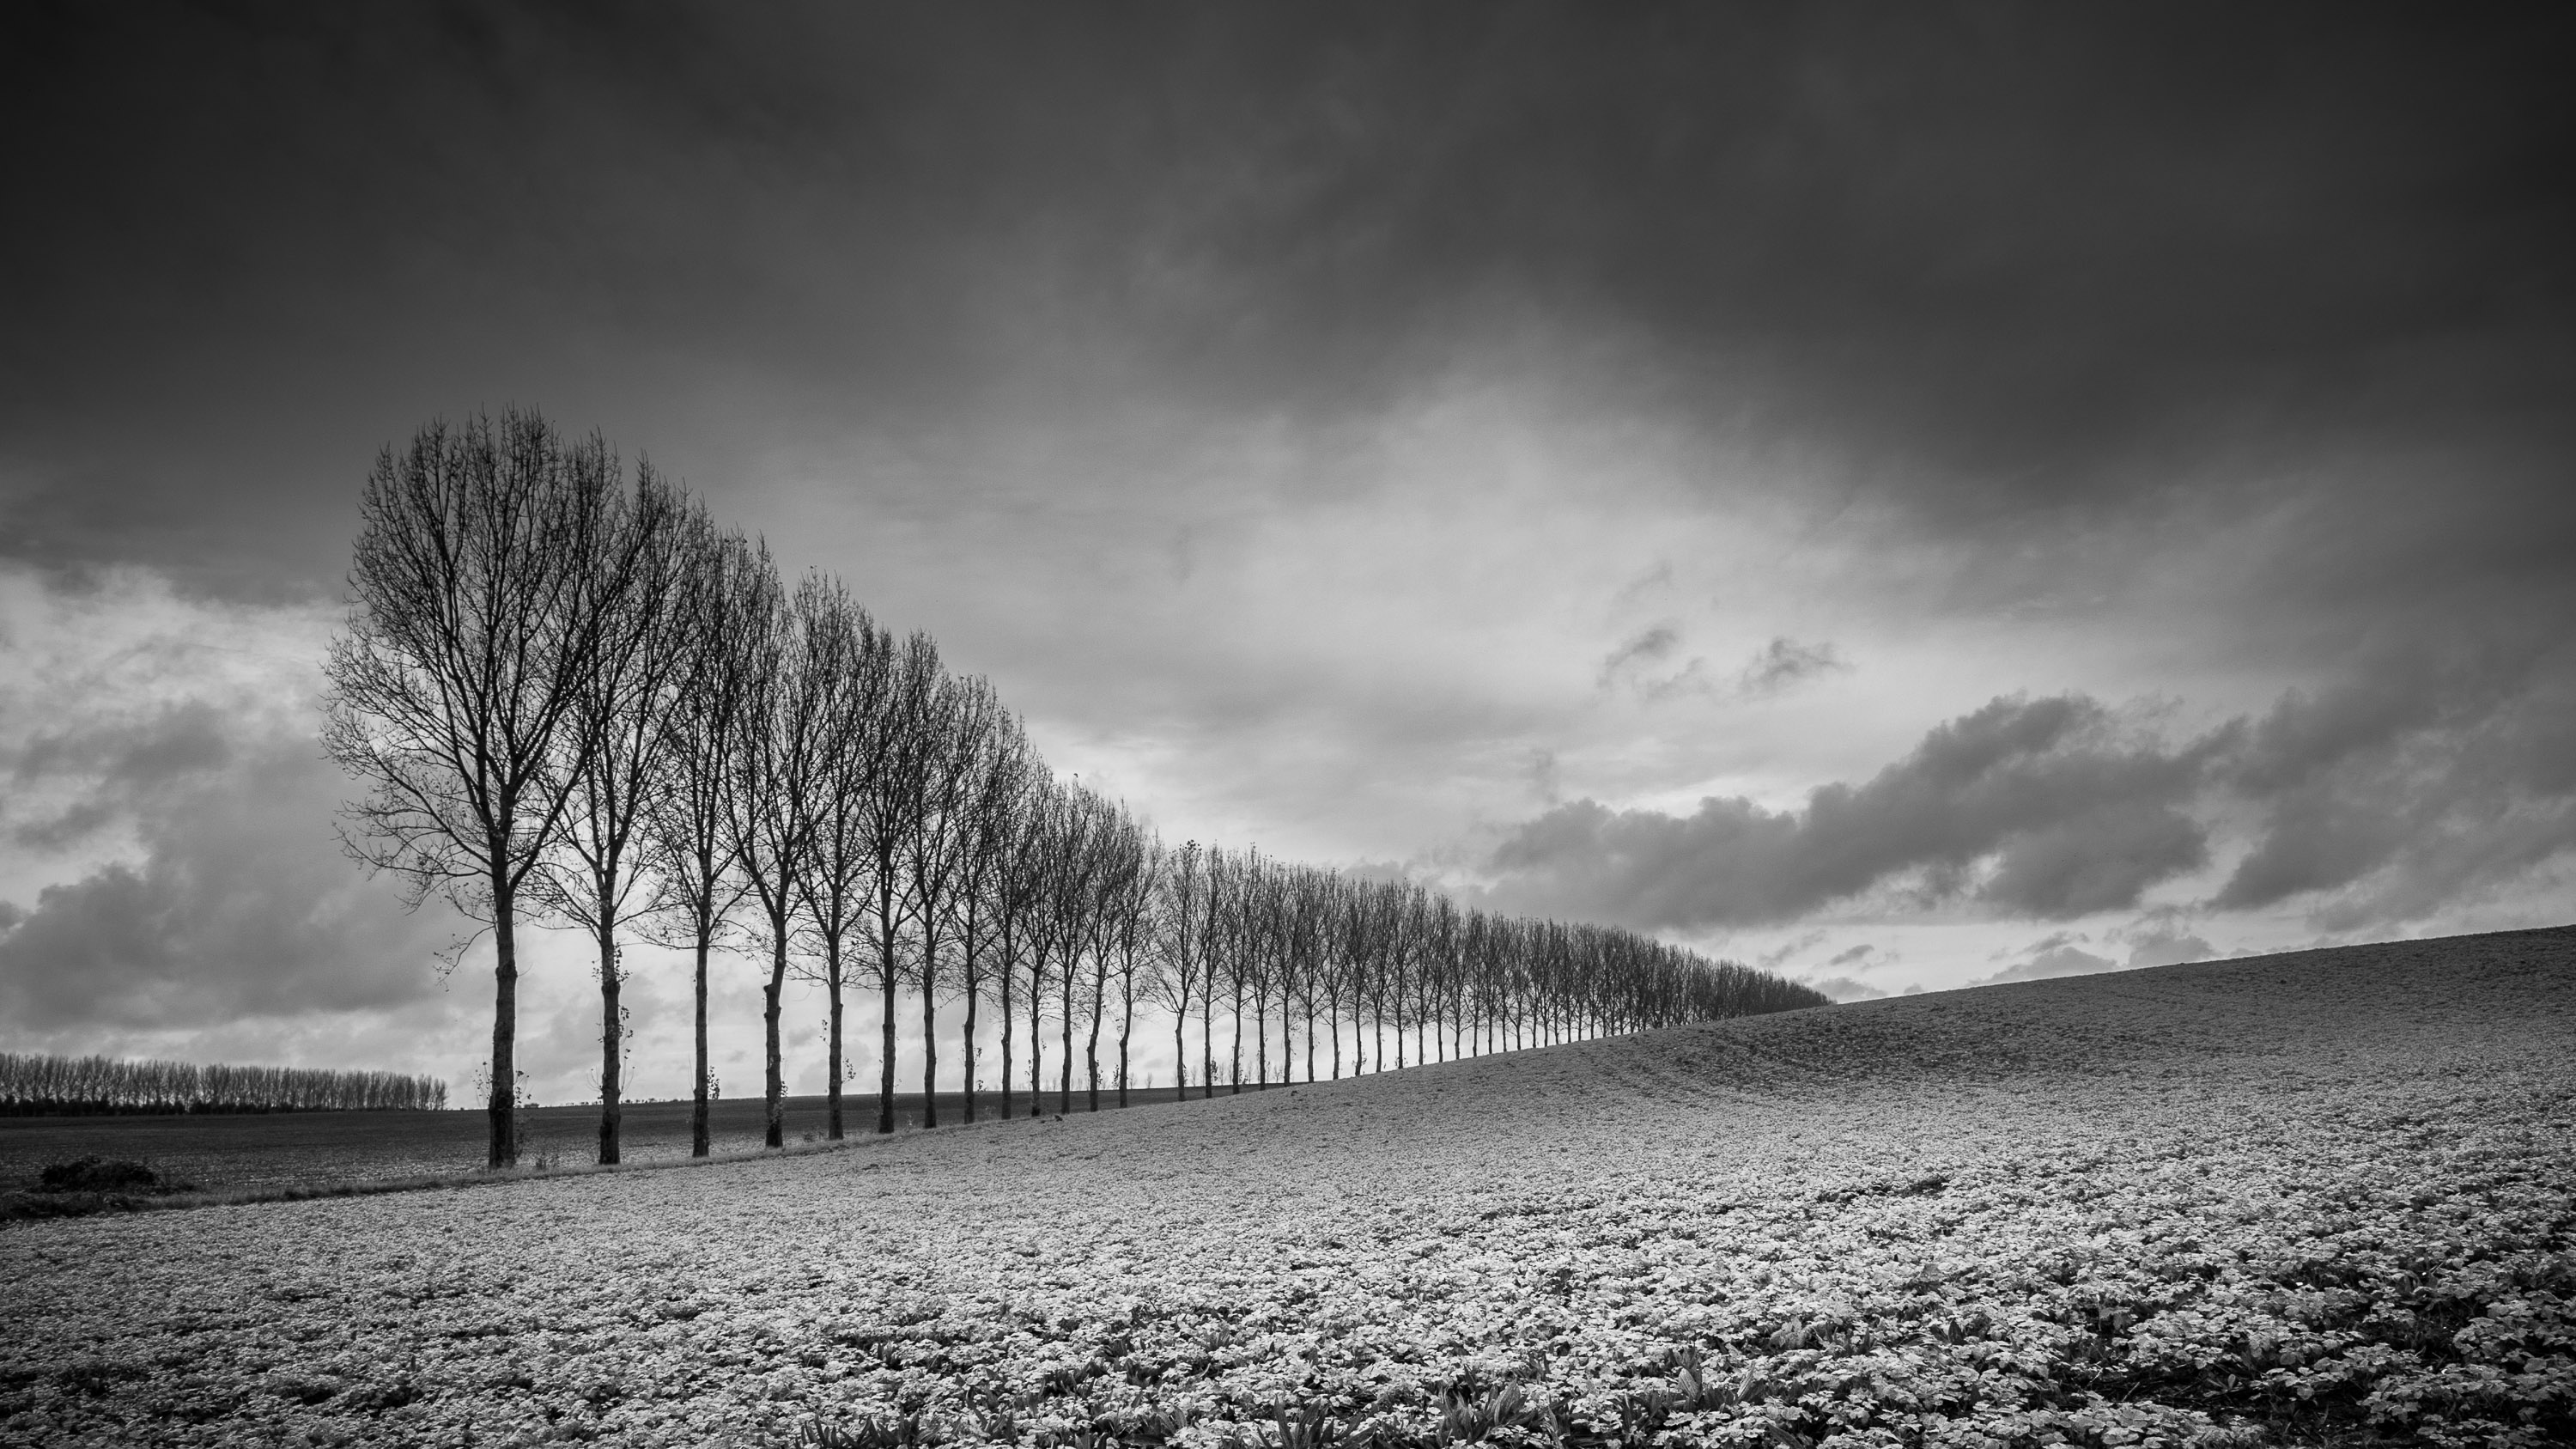 Mastering black and white photography